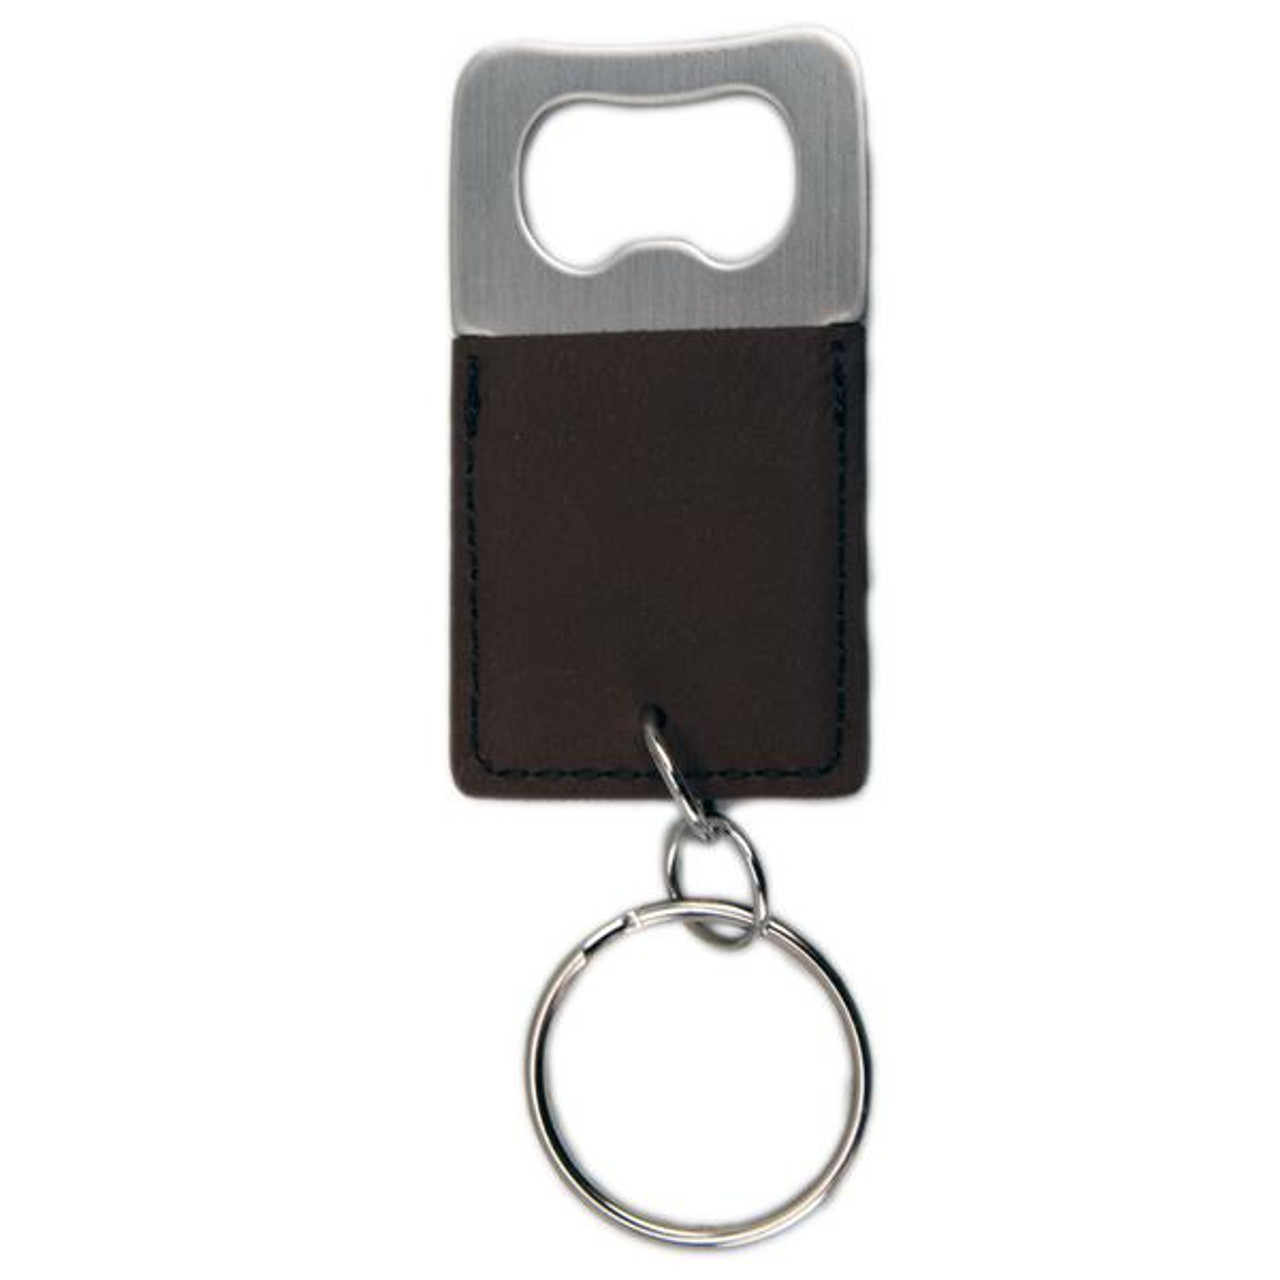 Looking for leather metal keychains like these. Hit me up with